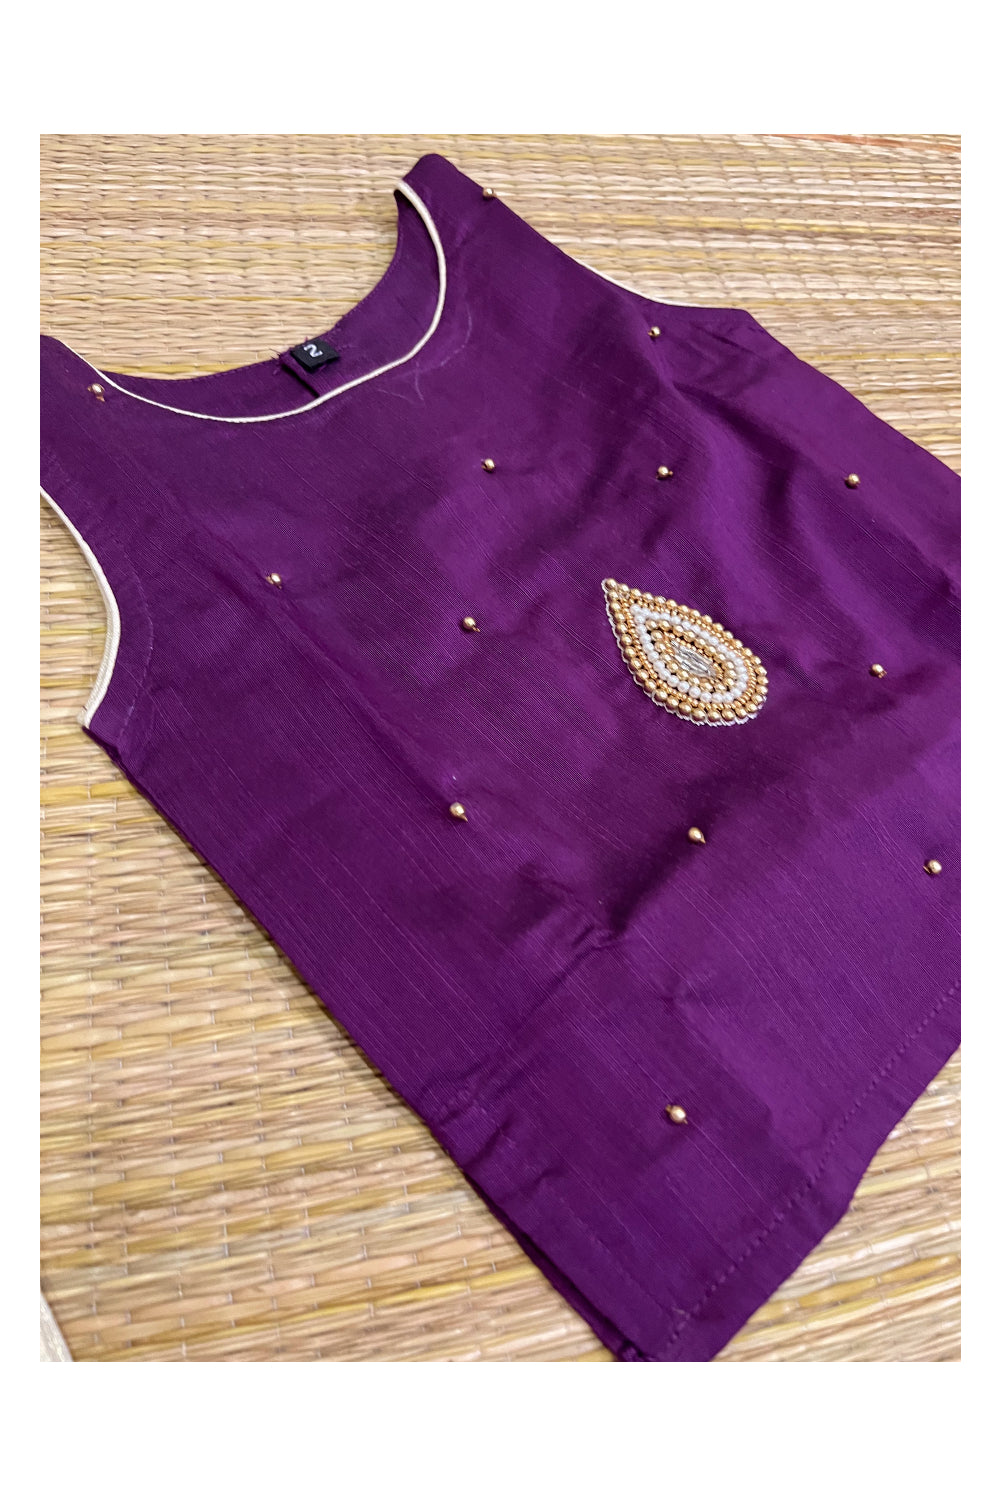 Southloom Kerala Pavada Blouse with Violet Bead Work Design